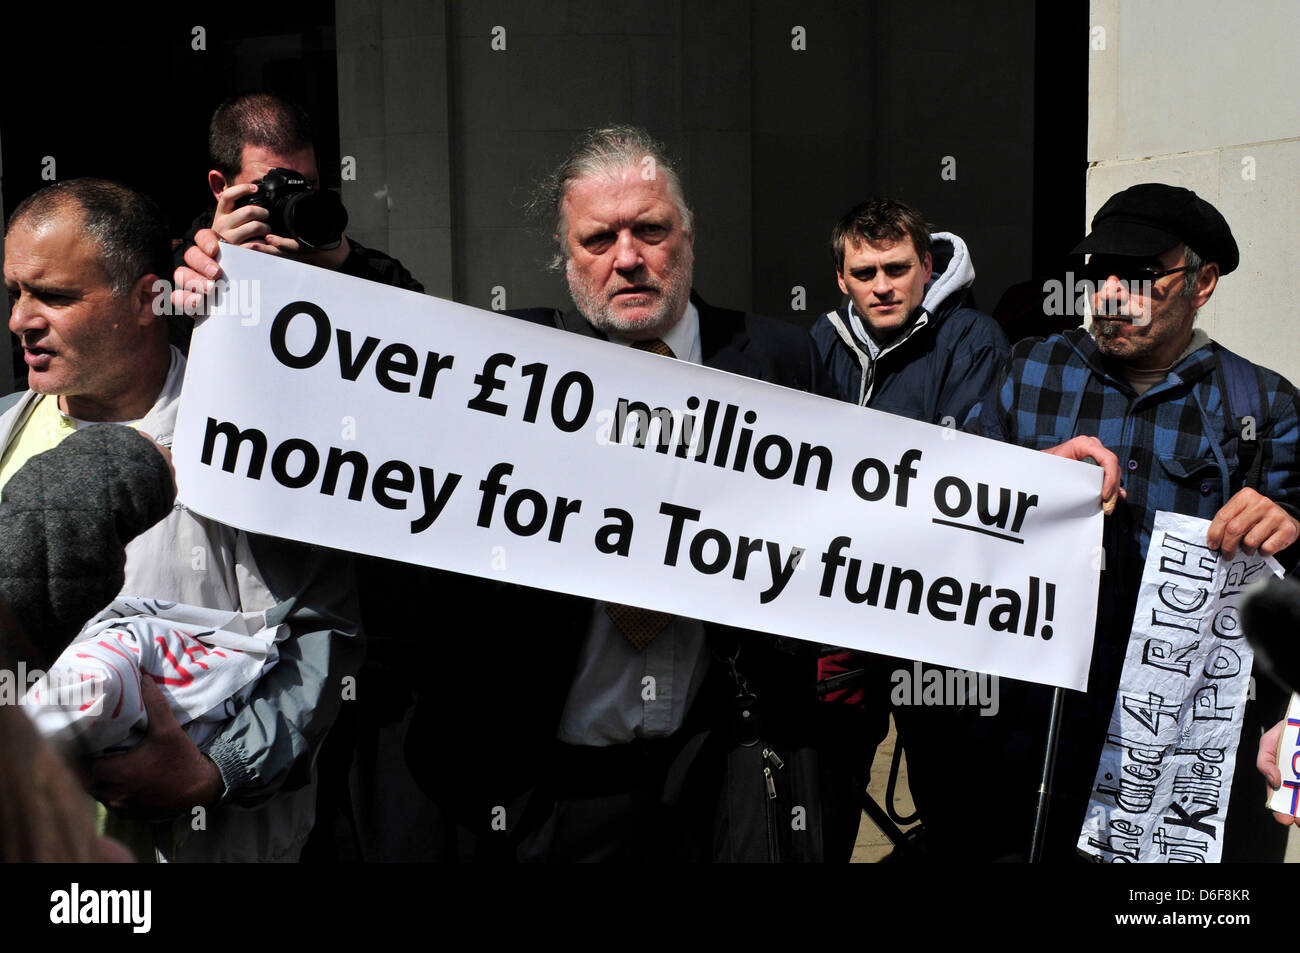 Protesters outside St Paul's Cathedral hold a banner reading ' Over £10 million of our money for a Tory funeral' . London, UK Stock Photo